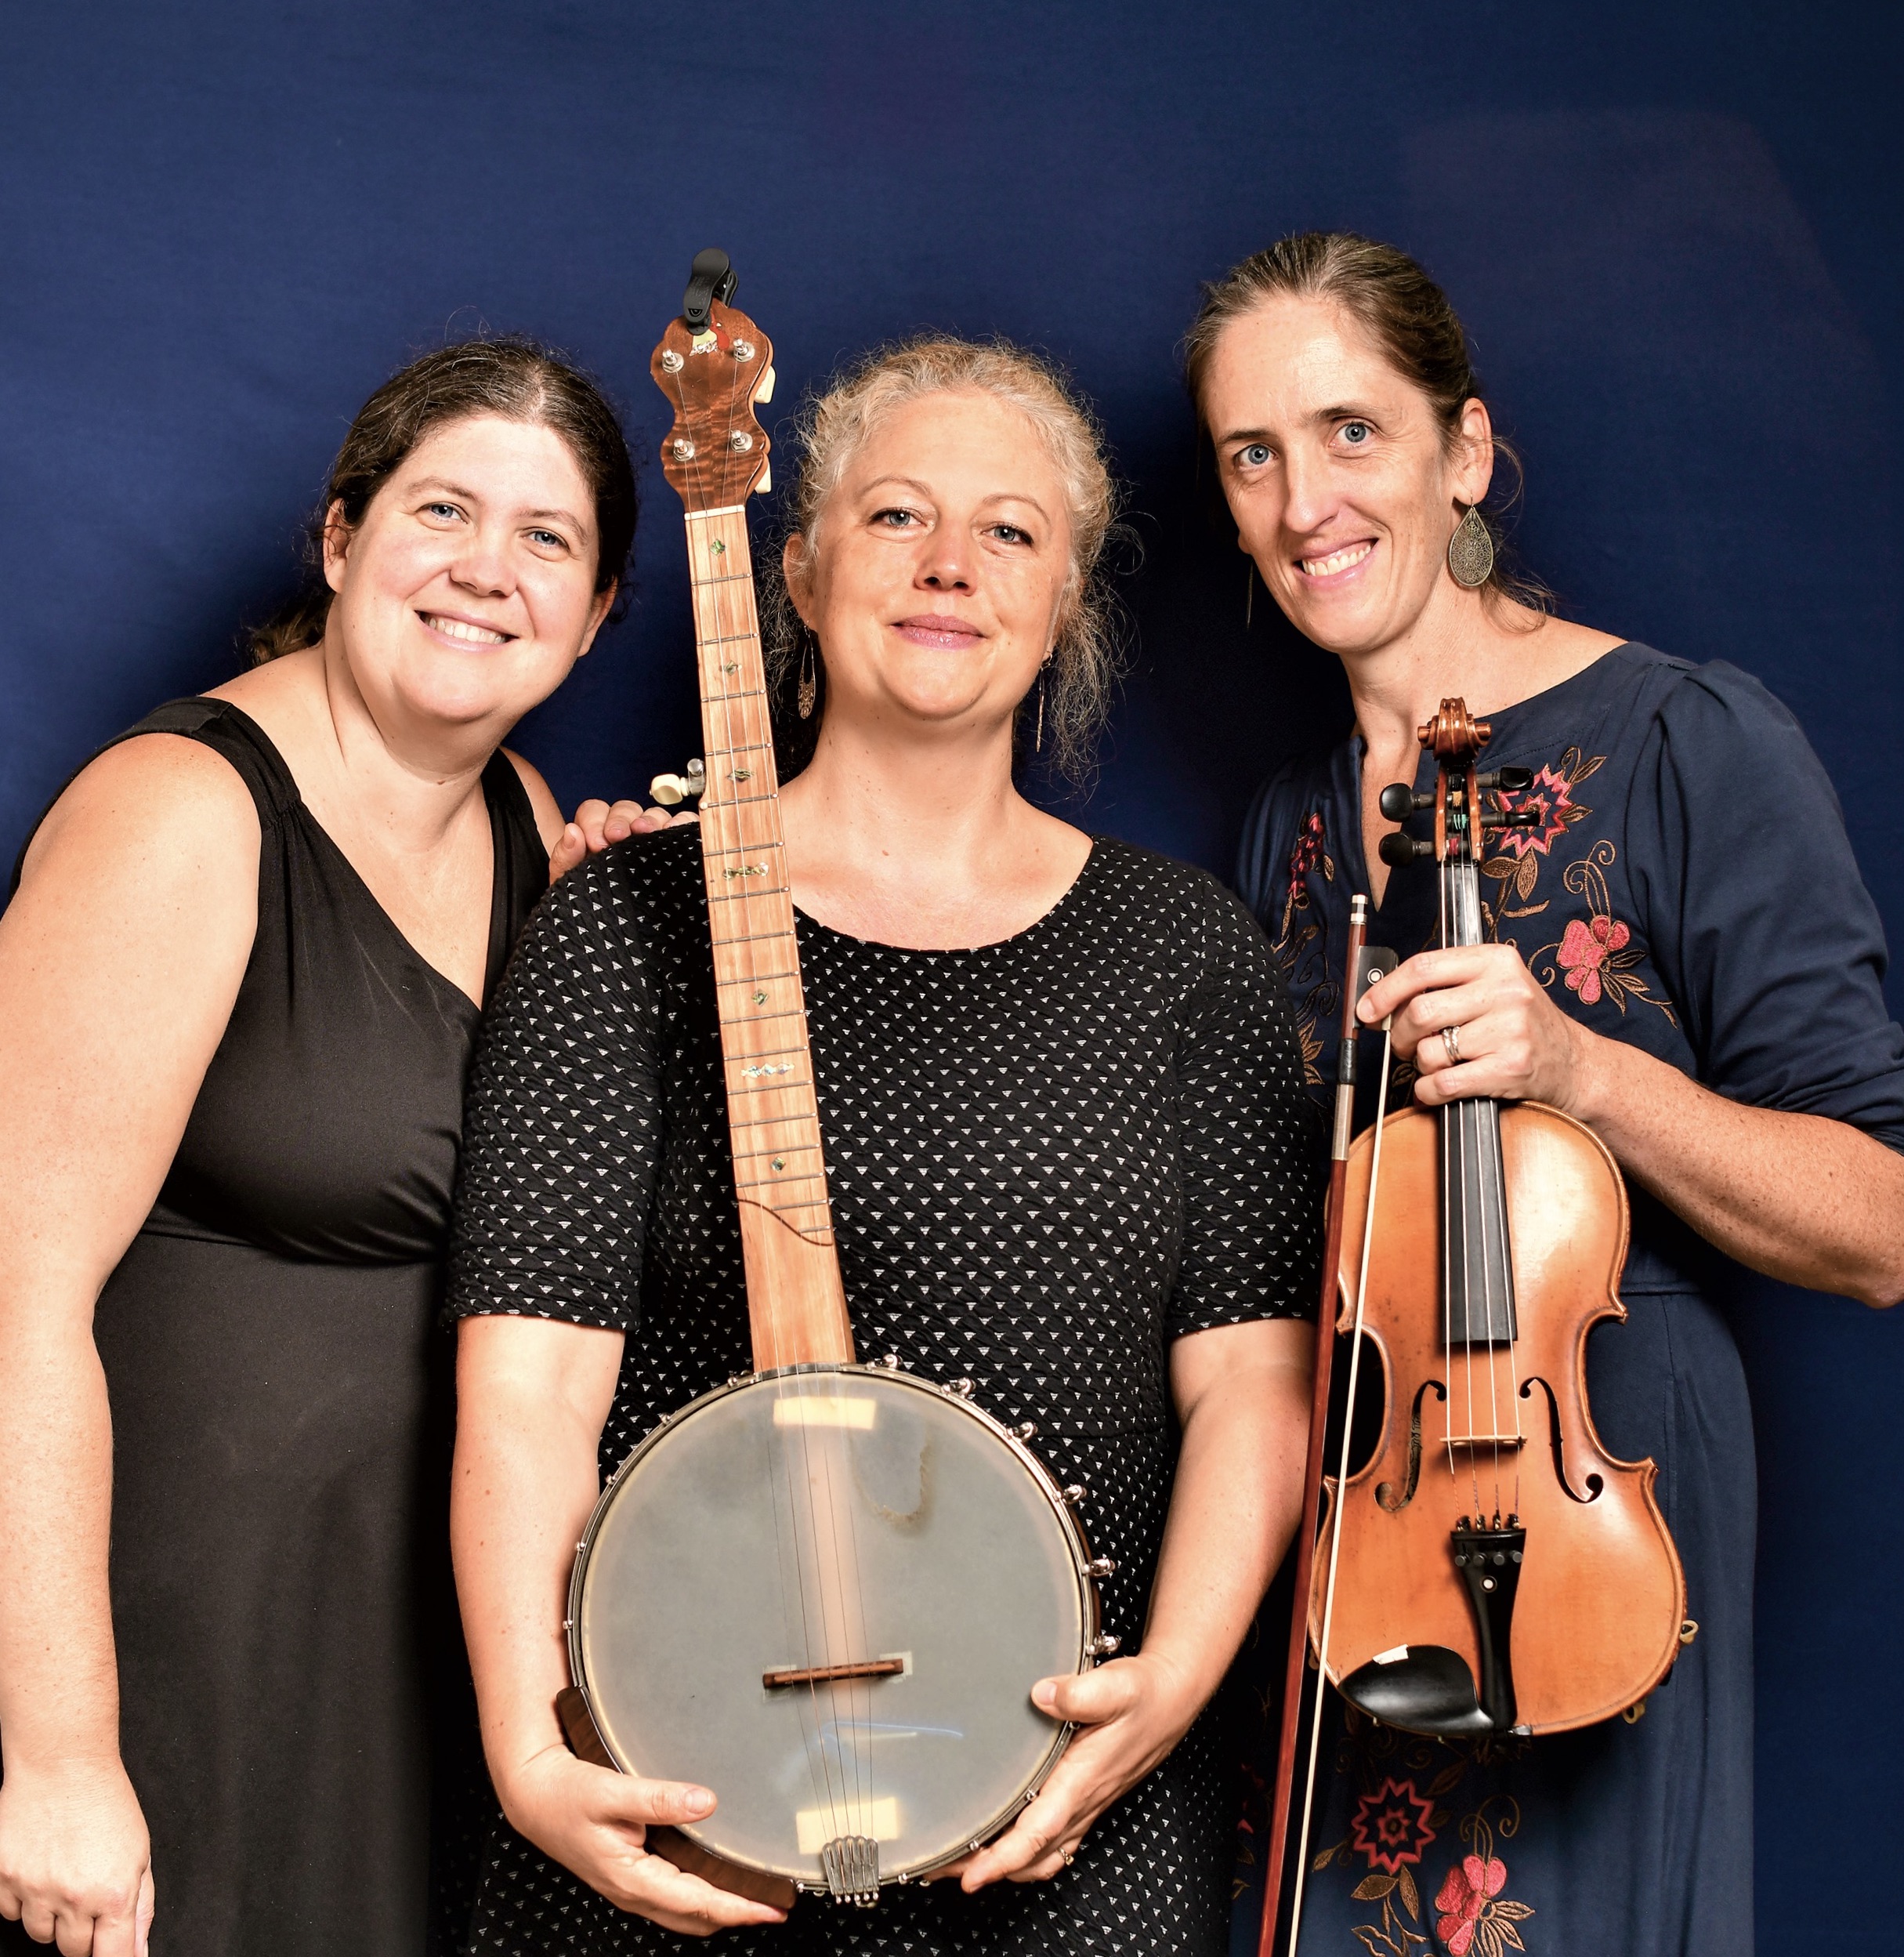 Annie Fain with her group Blue Eyed Girl who has performed at the Folk School for years and will be performing a Friday night concert and Saturday night dance this August.